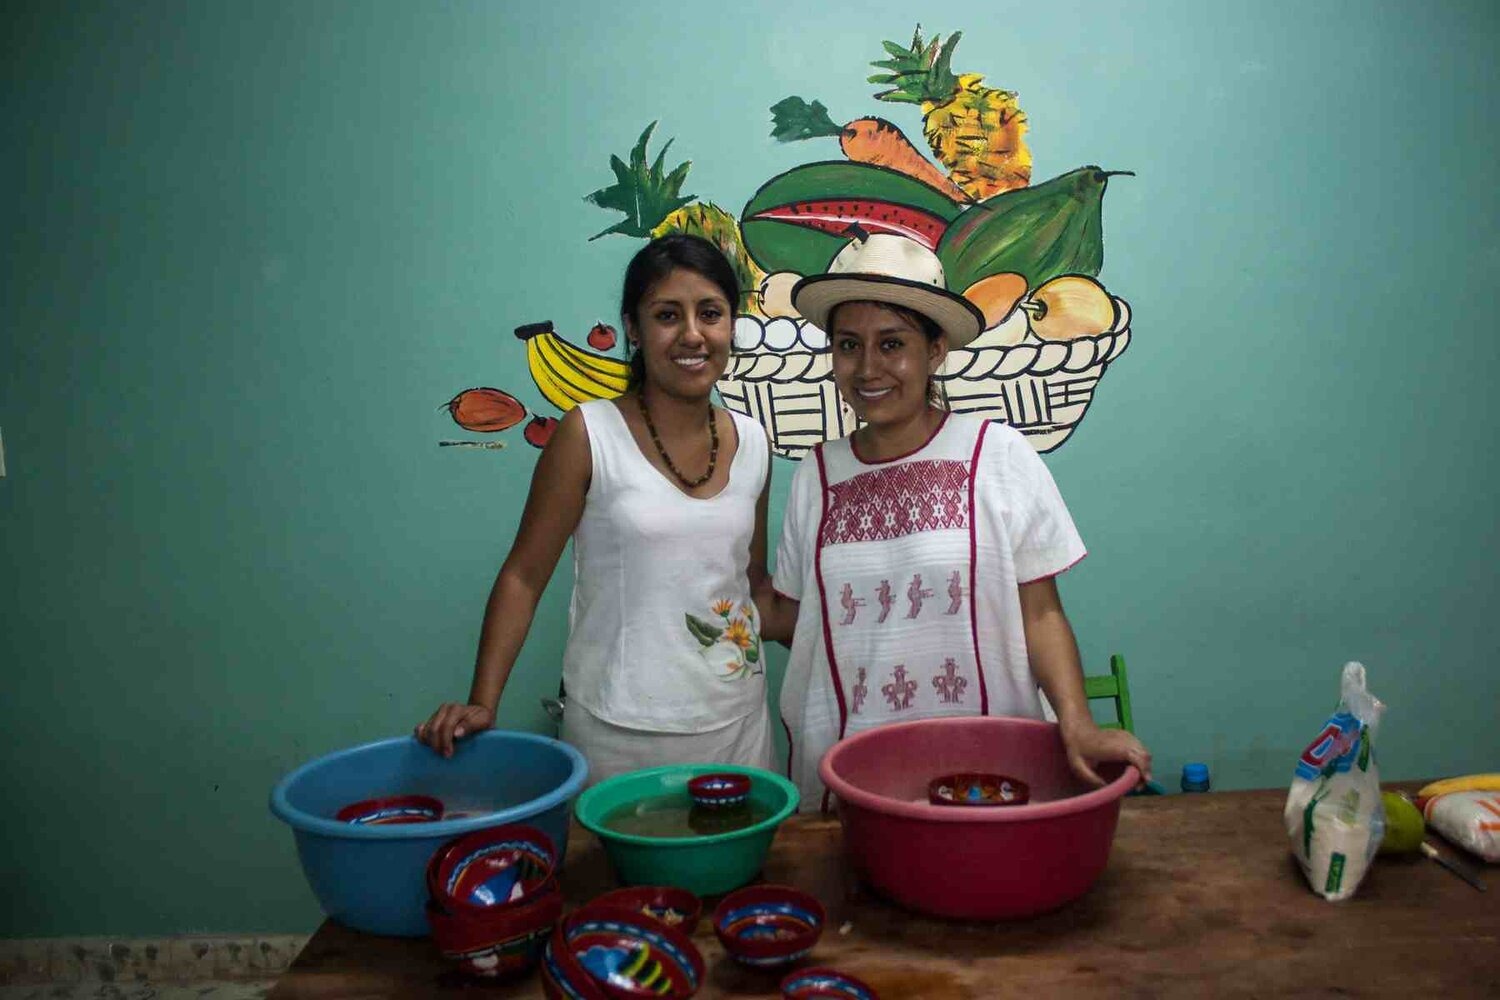  - Zapotec youth demonstrating the preparation of tejate, a pre-Columbian beverage based on cacao and maize. (Photo Credit: Flavia Trecco, Yakanal)